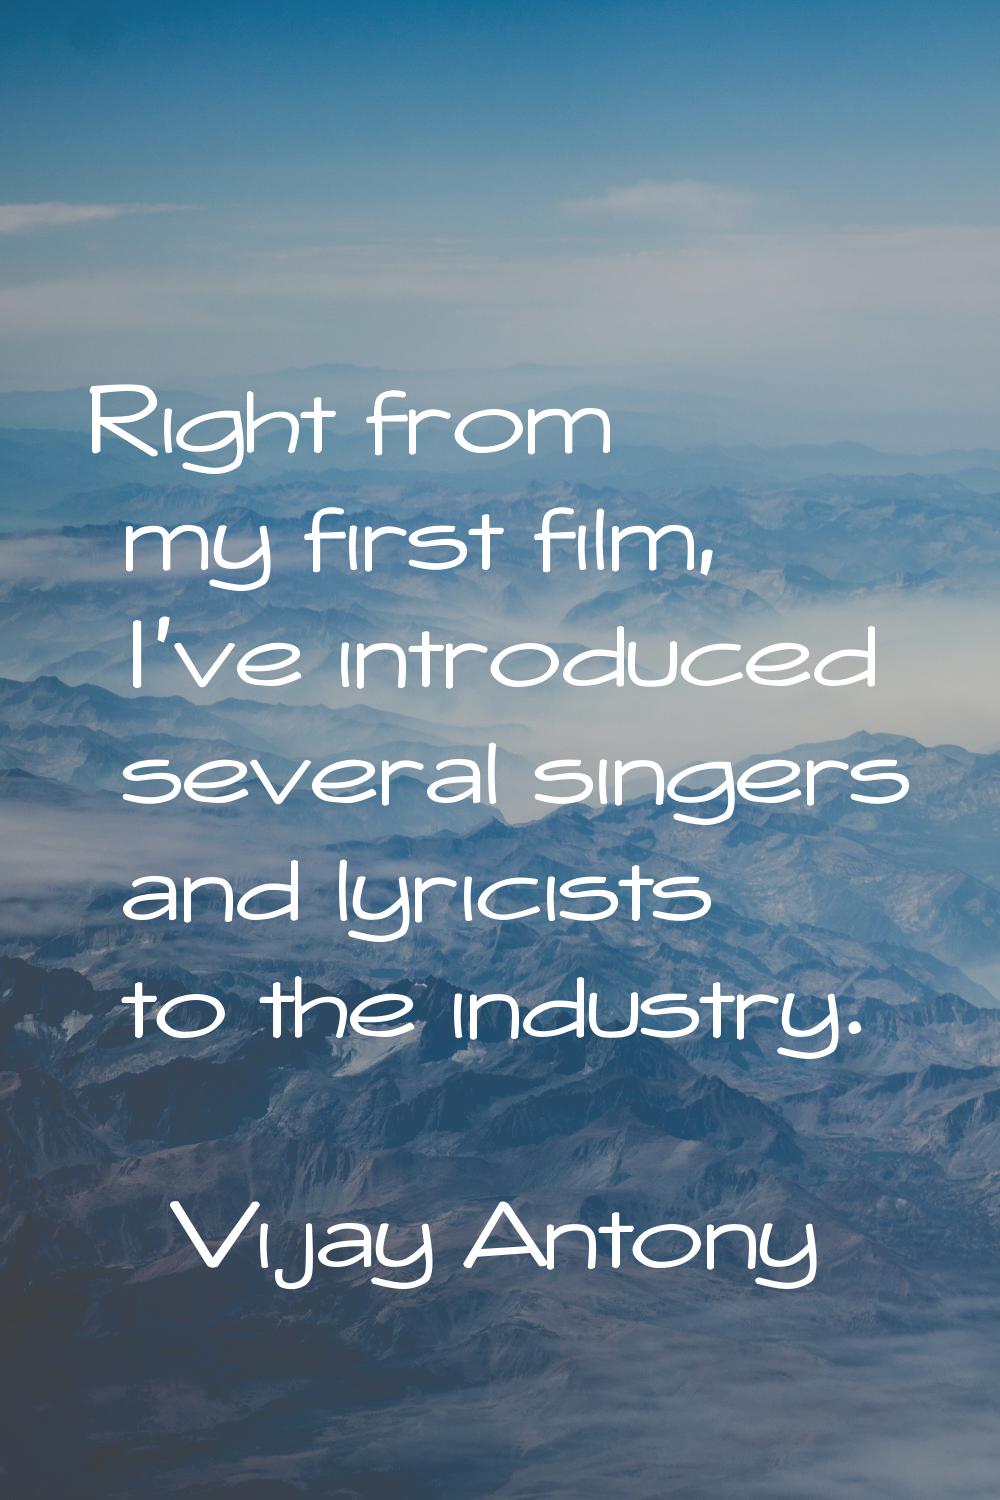 Right from my first film, I've introduced several singers and lyricists to the industry.